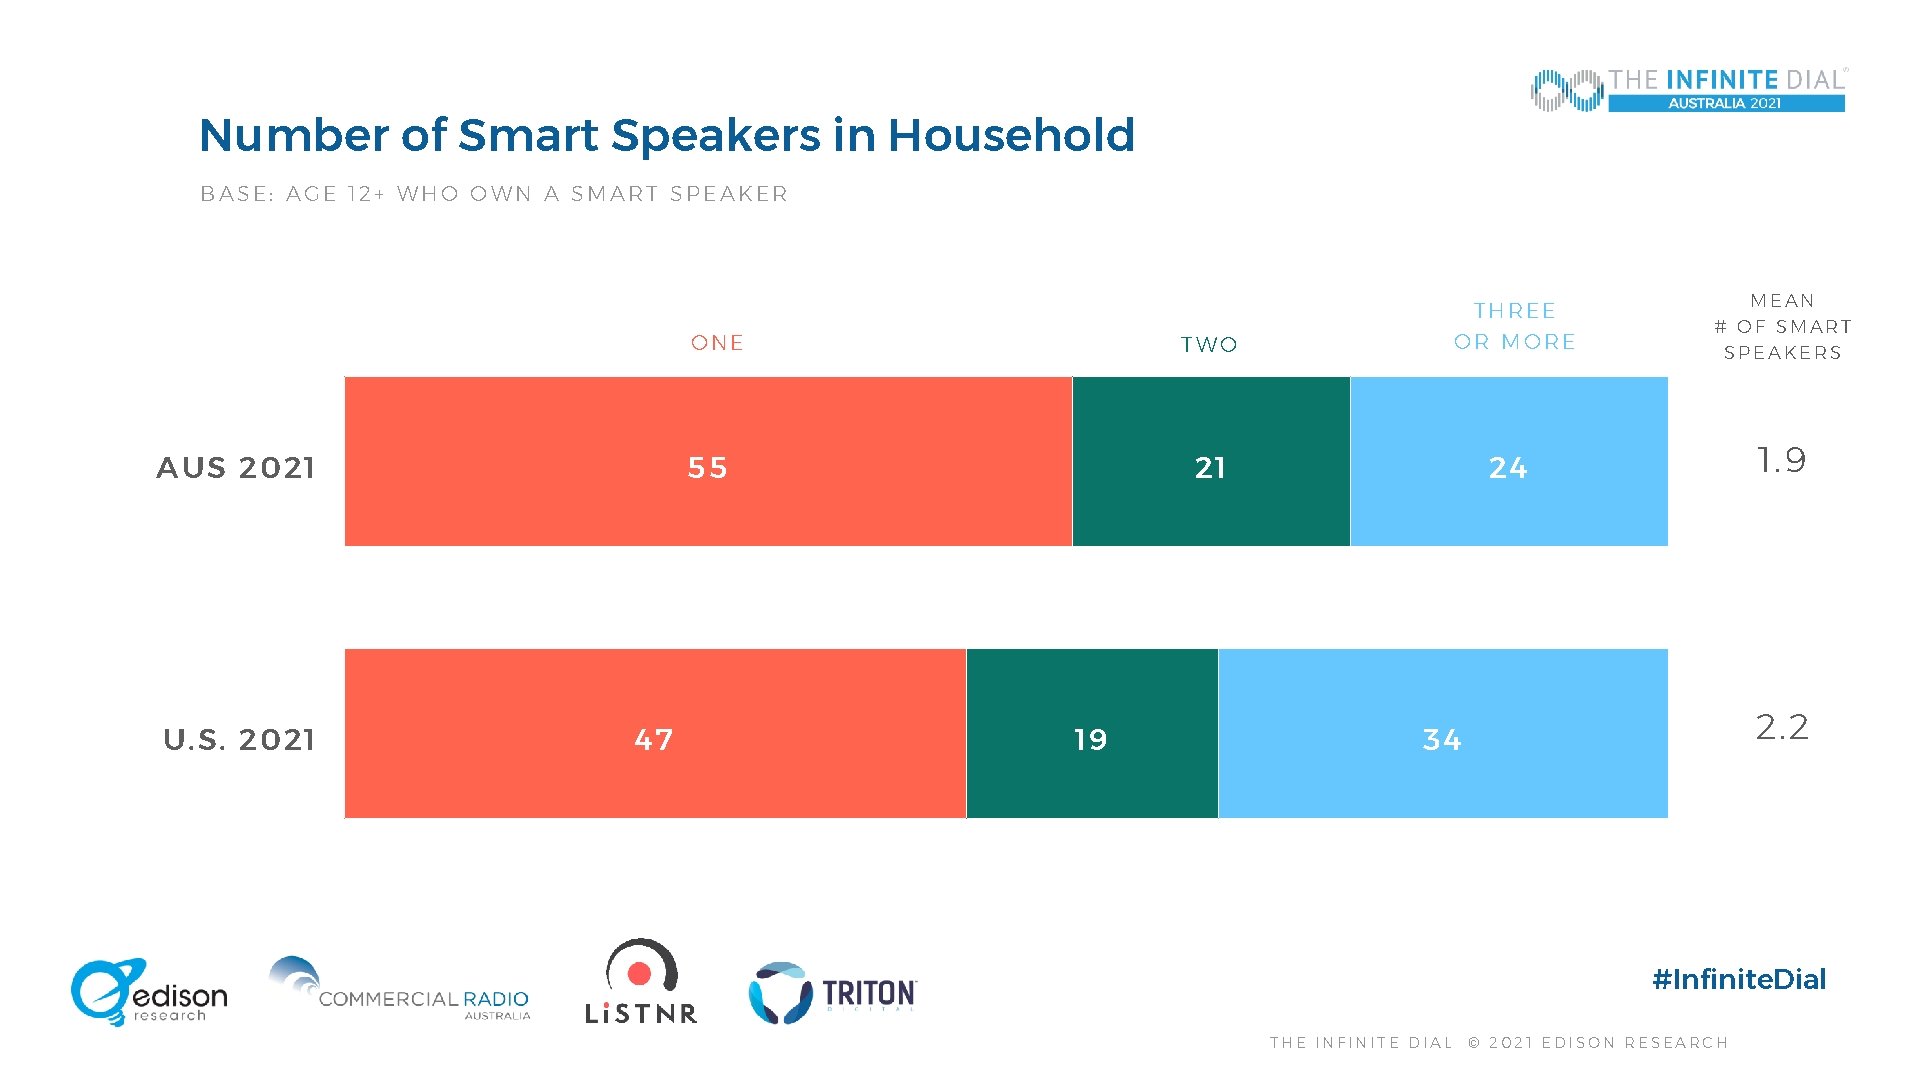 Number of Smart Speakers in Household BASE: AGE 12+ WHO OWN A SMART SPEAKER